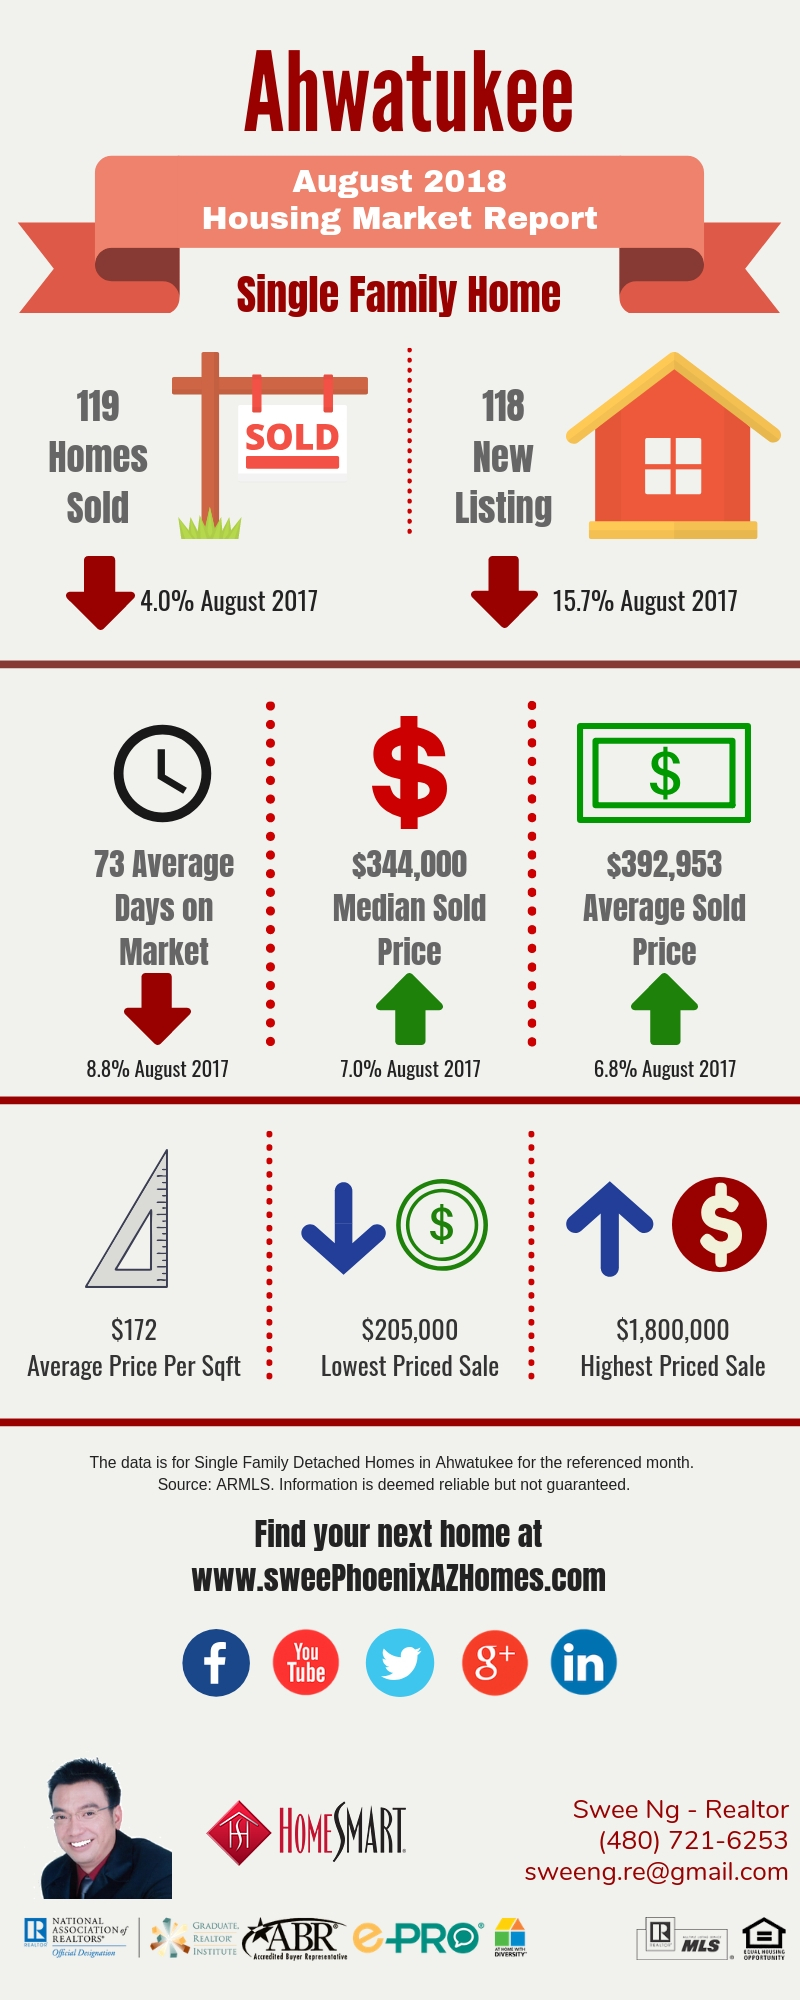 Ahwatukee Housing Market Trends Report August 2018, House Value, Real Estate and Statistic by Swee Ng